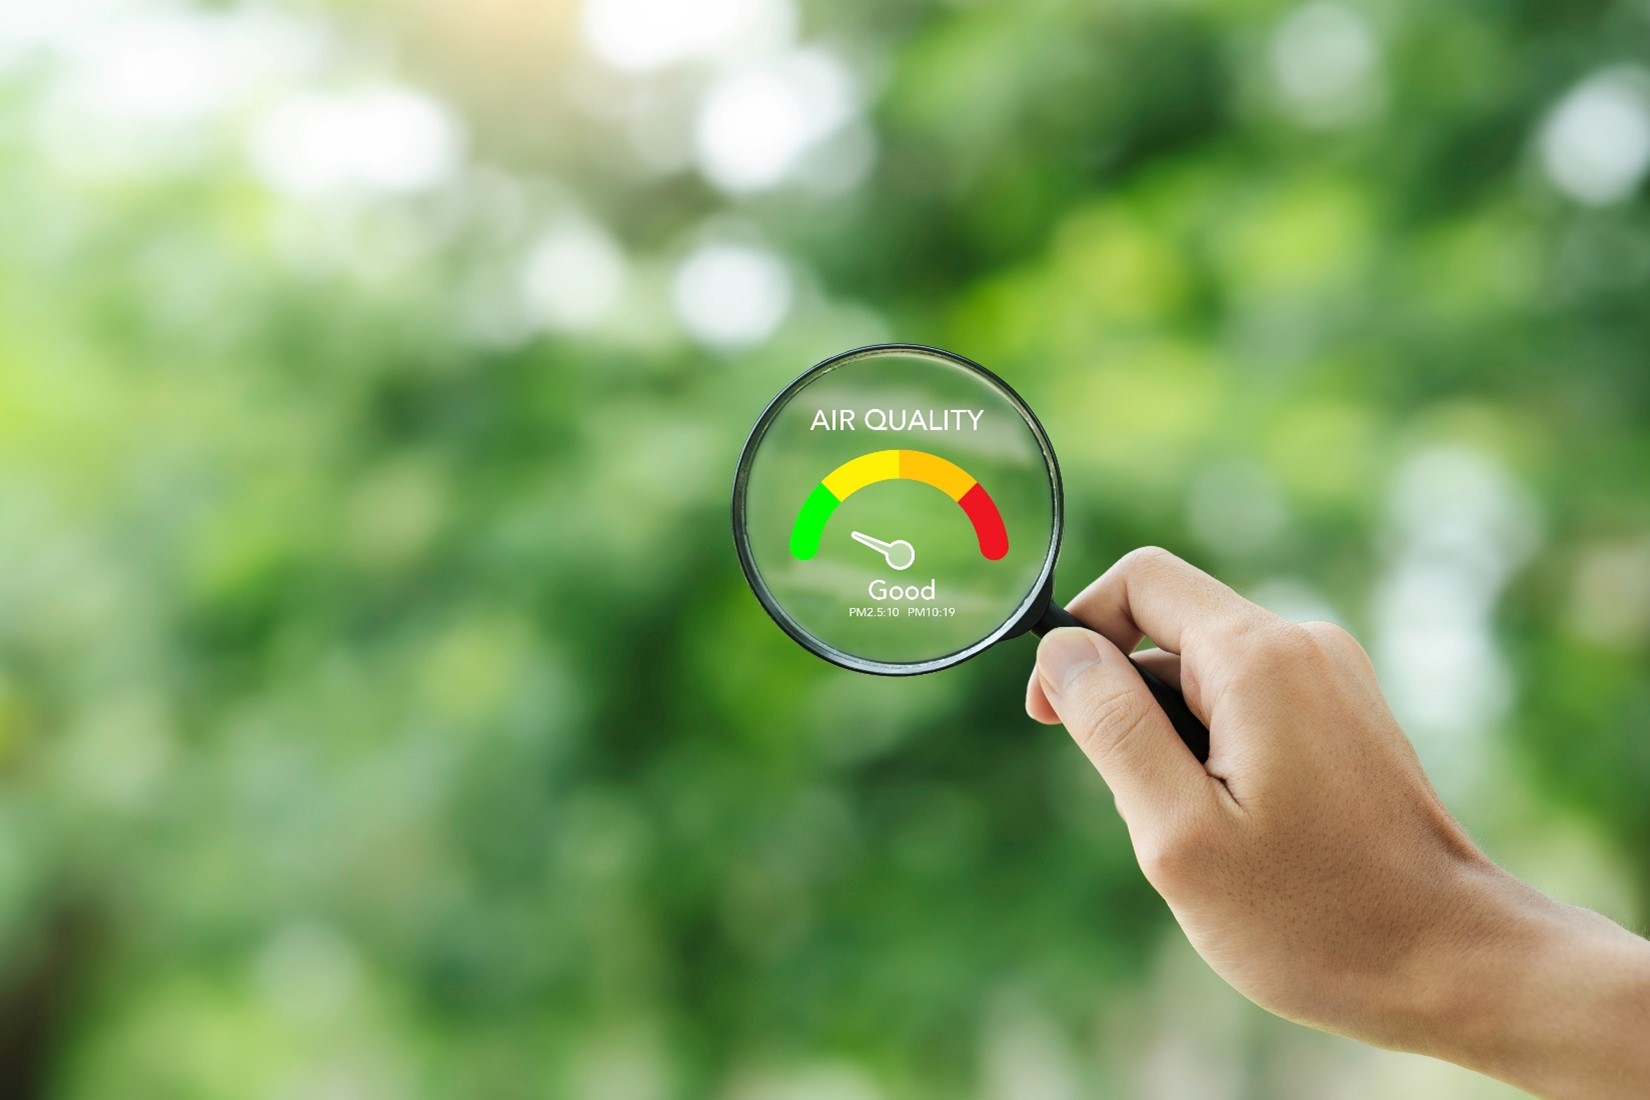 A hand holding a magnifying glass showing good air quality next to a blurred background of greenery.